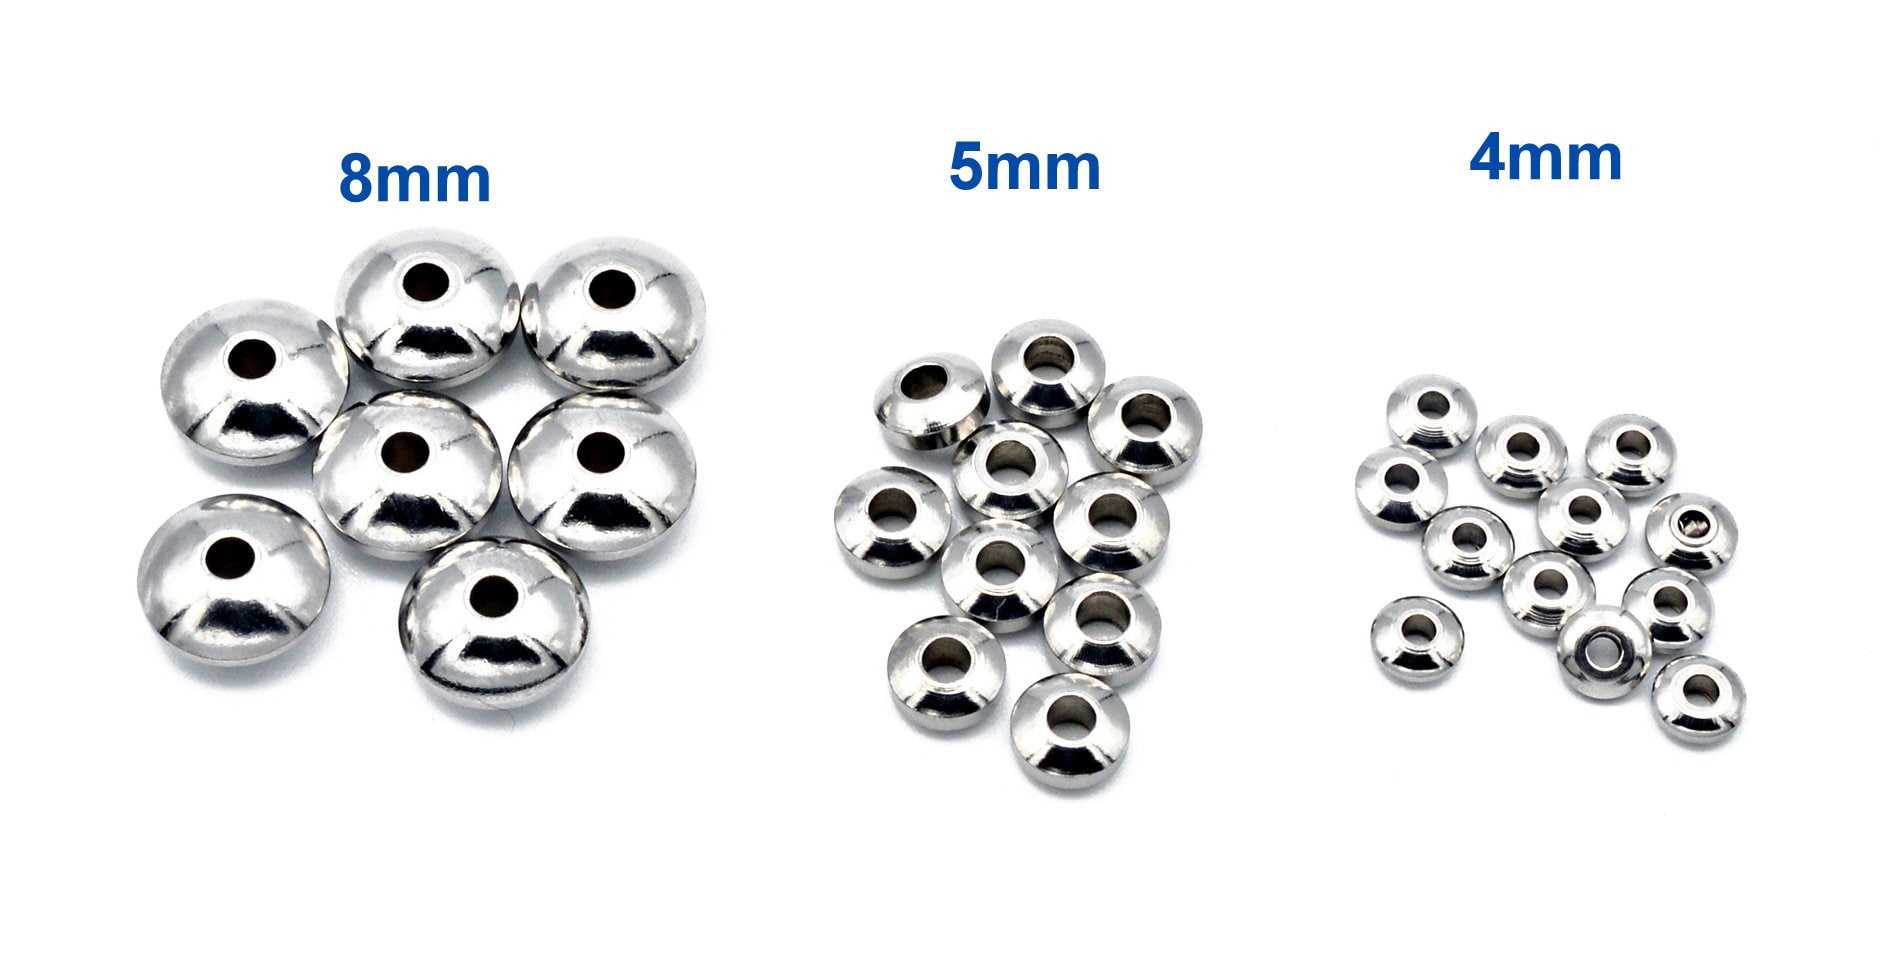 20 PCs Stainless Steel Silver Wheel Roundel Plain Spacer Beads Size 4mm, 5mm,8mm Jewelry Finding Supply For Jewelry Making